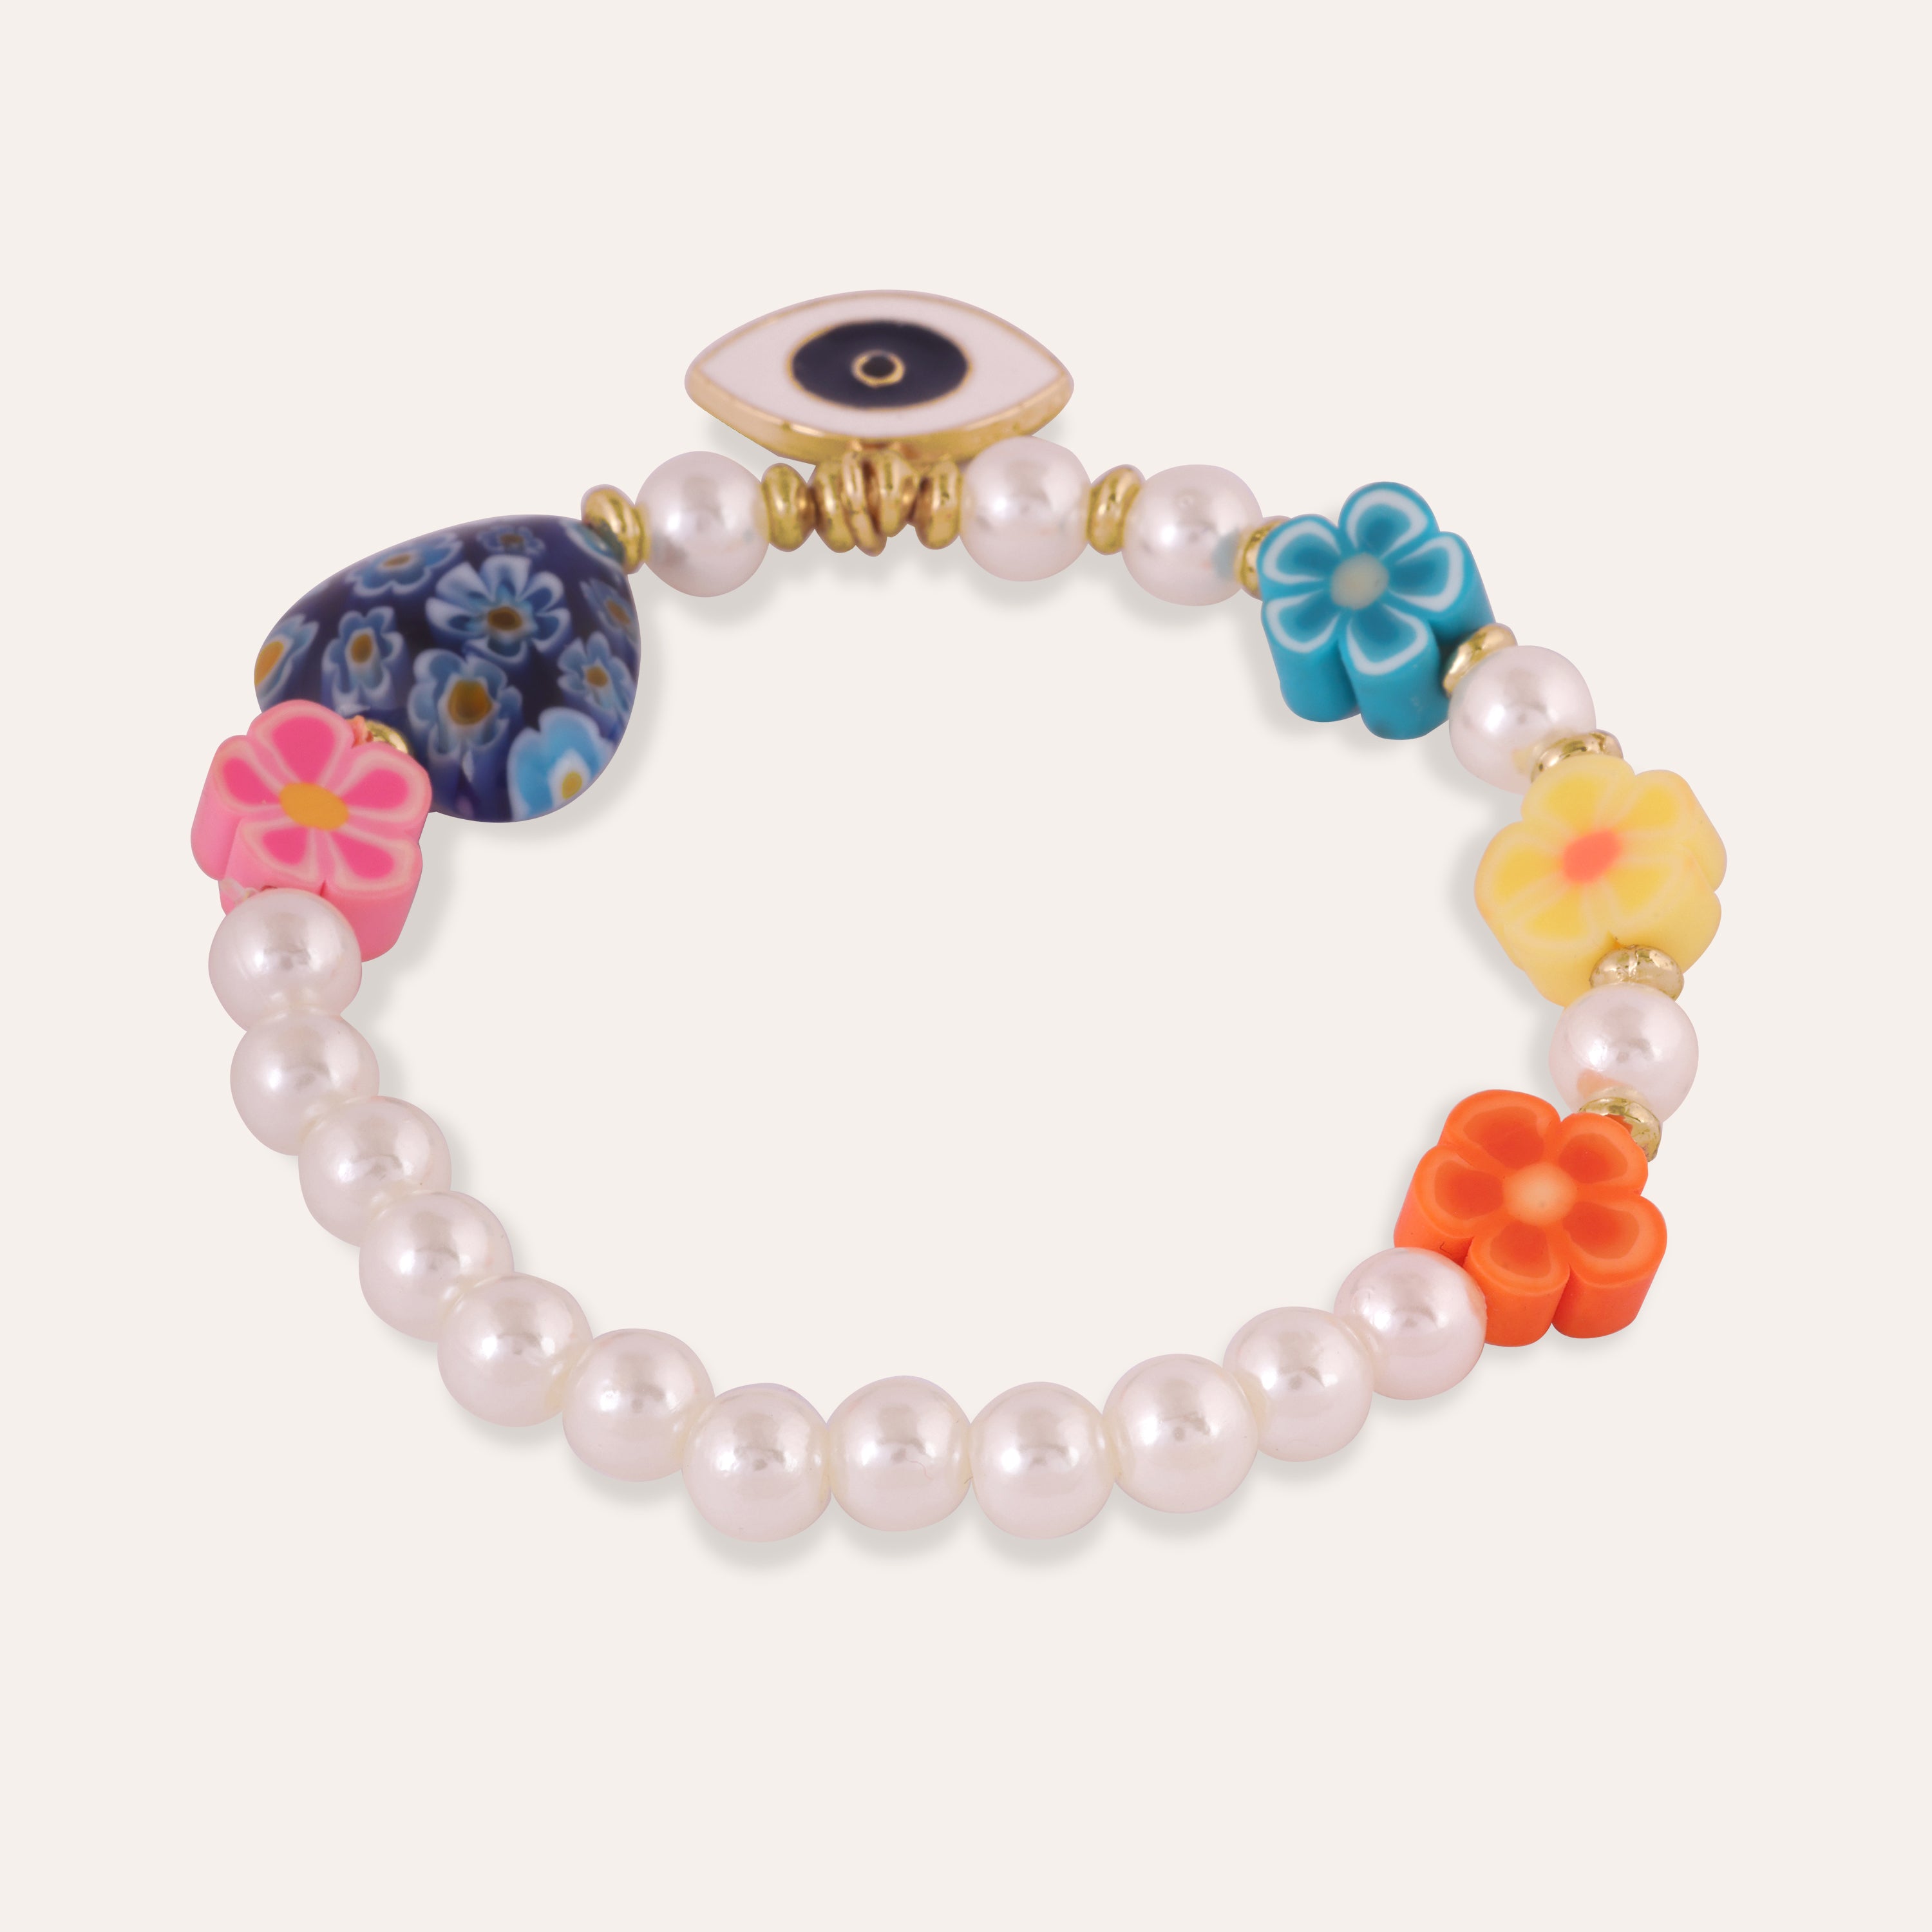 TFC Y2K Multicolor Pearl Beaded bracelet-Discover our stunning collection of stylish bracelets for women, featuring exquisite pearl bracelets, handcrafted beaded bracelets, and elegant gold-plated designs. Enjoy cheapest anti-tarnish fashion jewellery and long-lasting brilliance only at The Fun Company